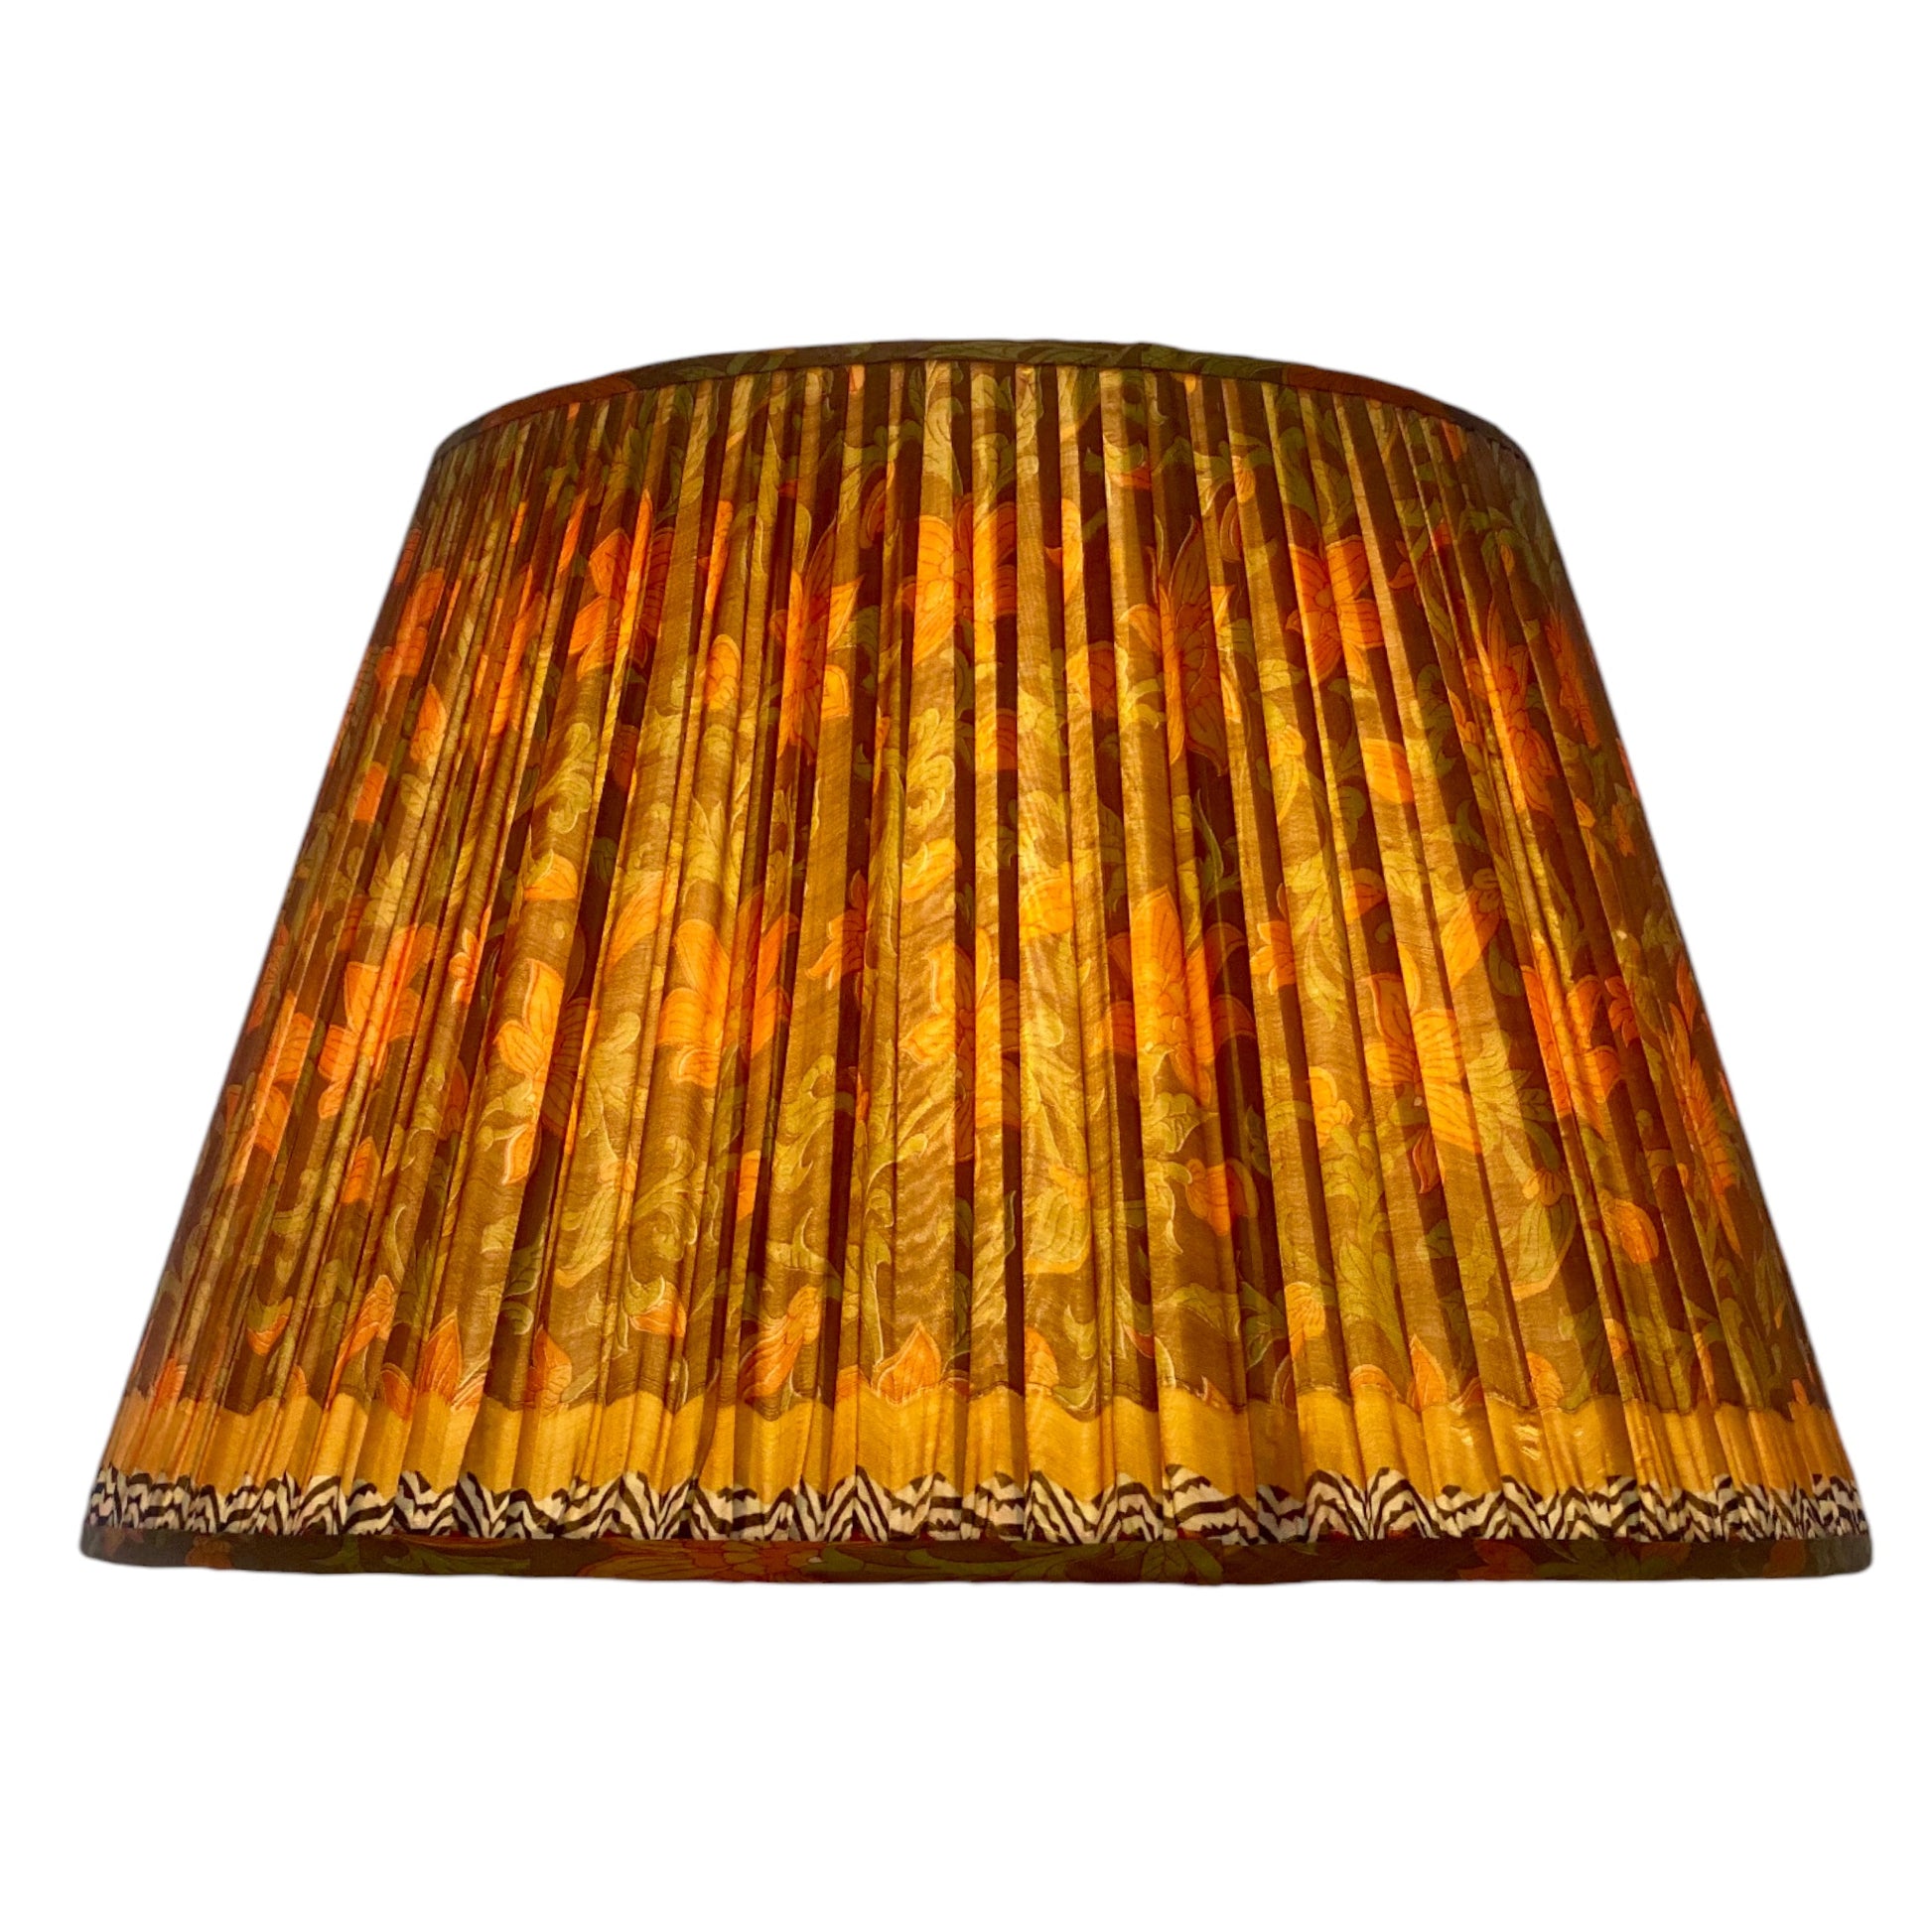 Orange and floral lampshade lit